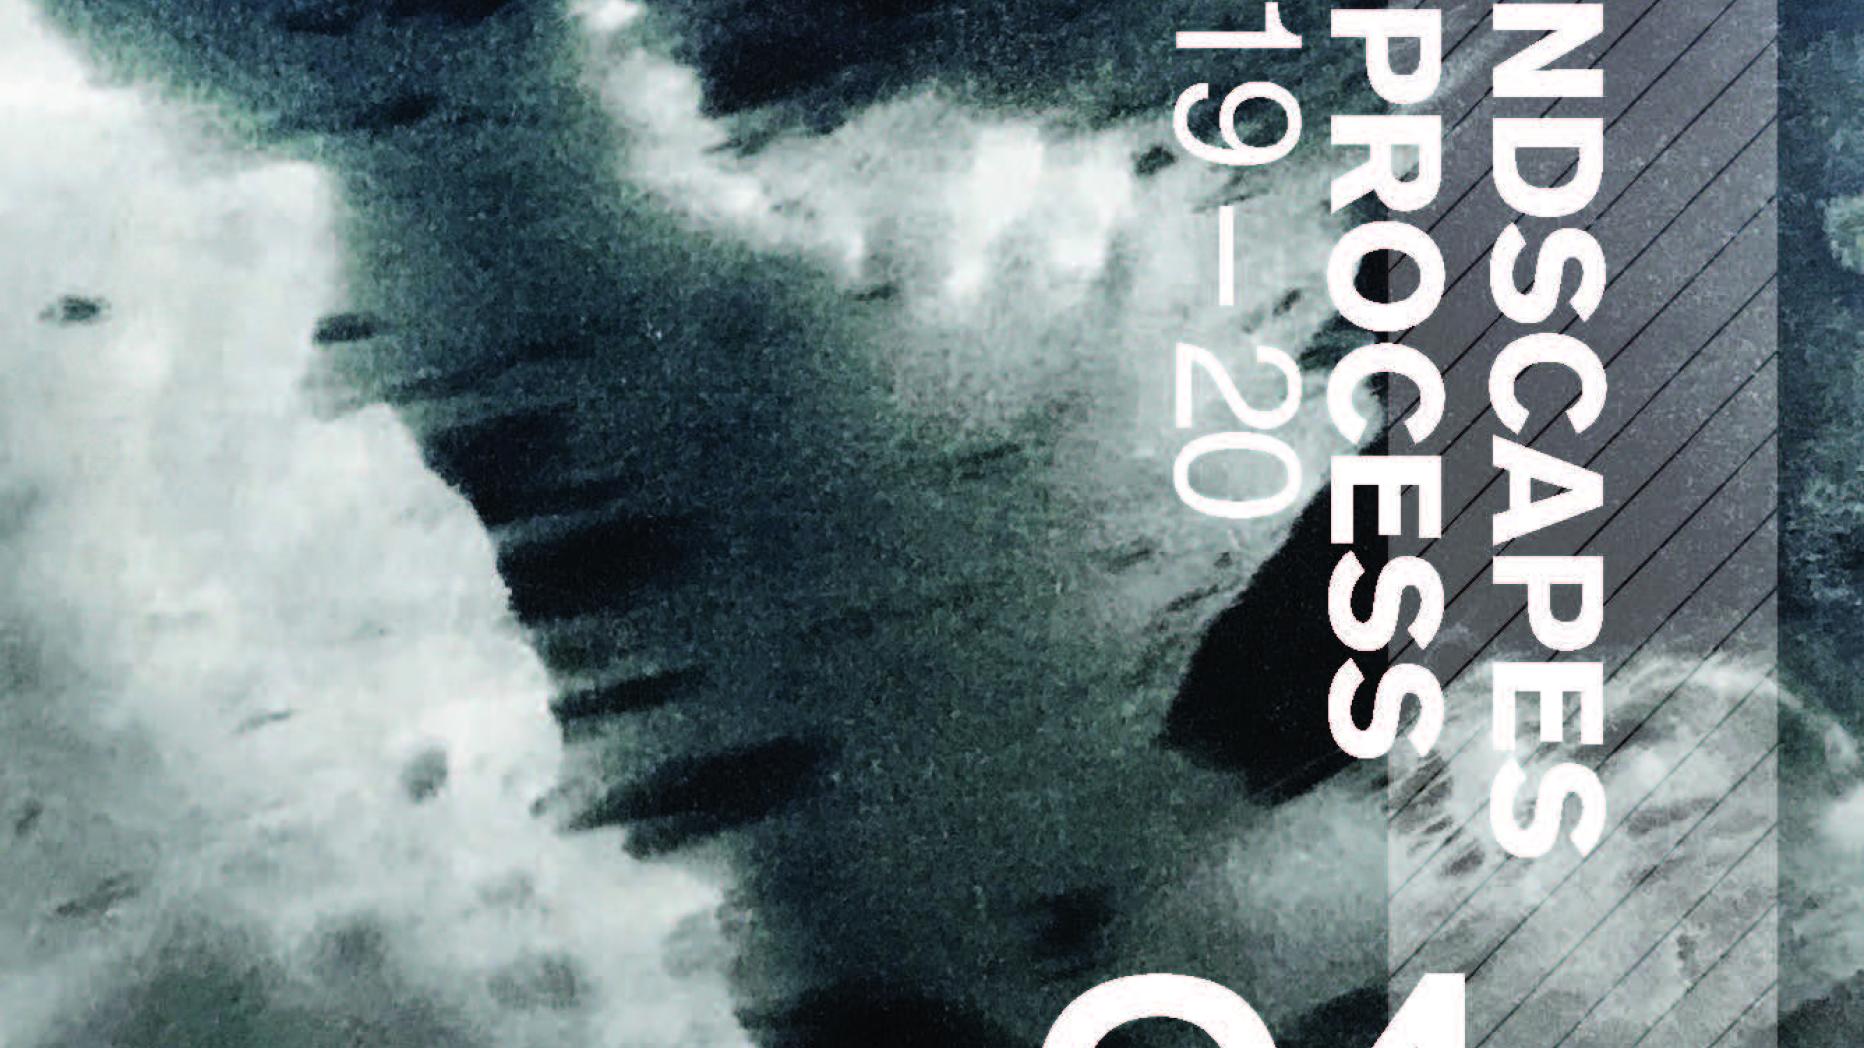 Cover for publication, "Landscapes in Process" edition 24, 2019-20